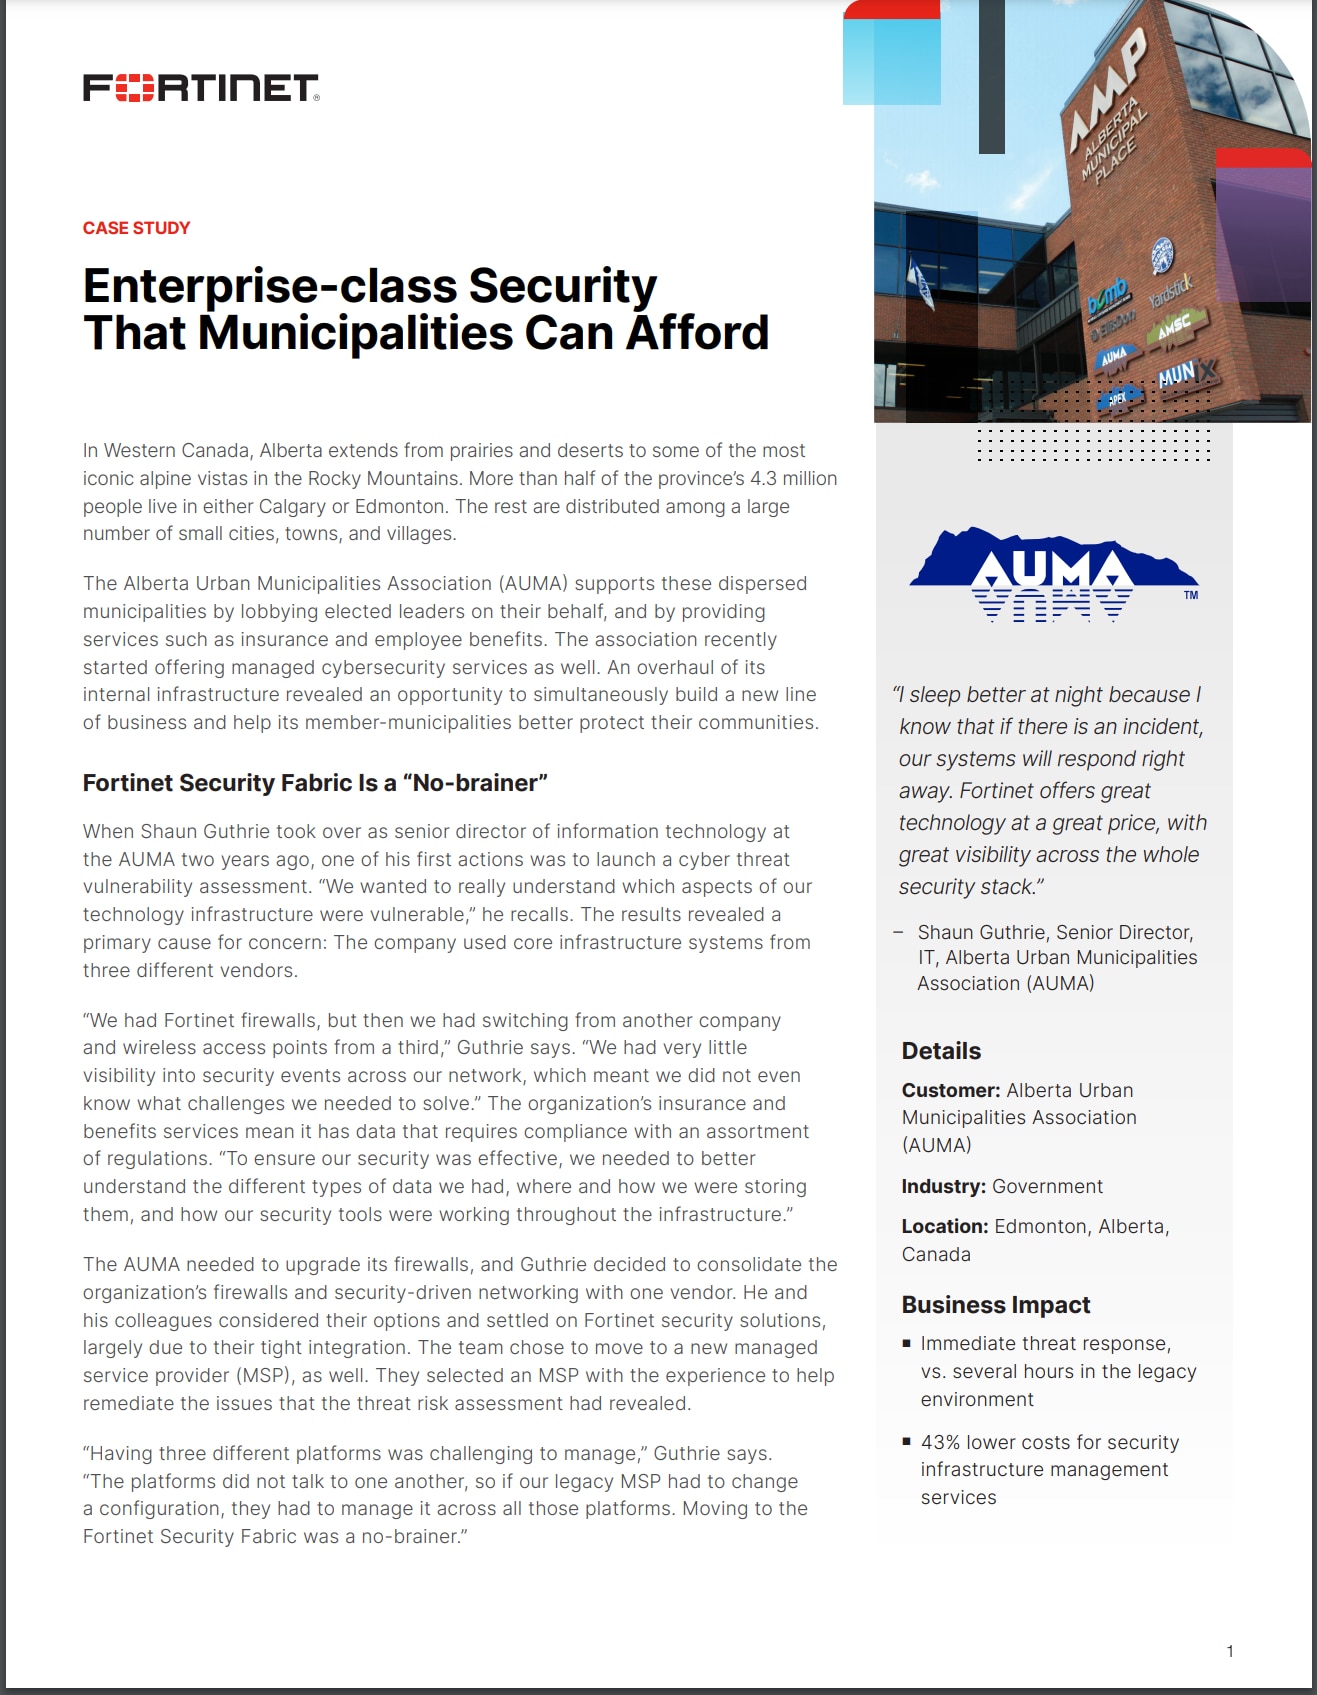 Case Study Enterprise-class Security That Municipalities Can Afford (sold in package, 10pc per package)